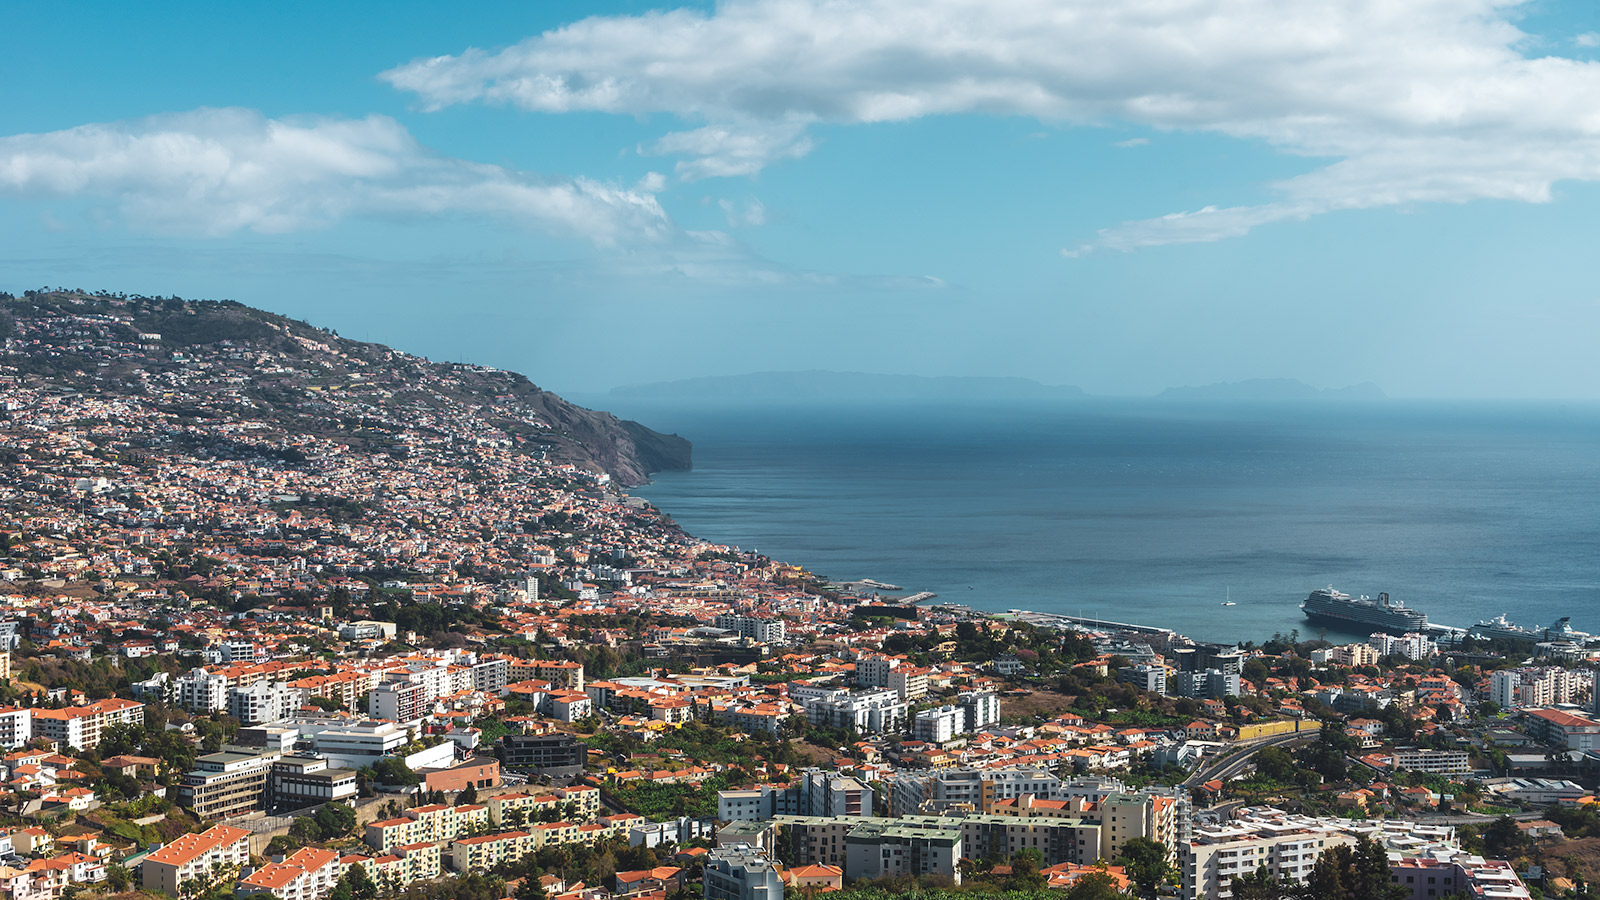 Views of Funchal from the Pico dos Barcelos viewpoint, Madeira